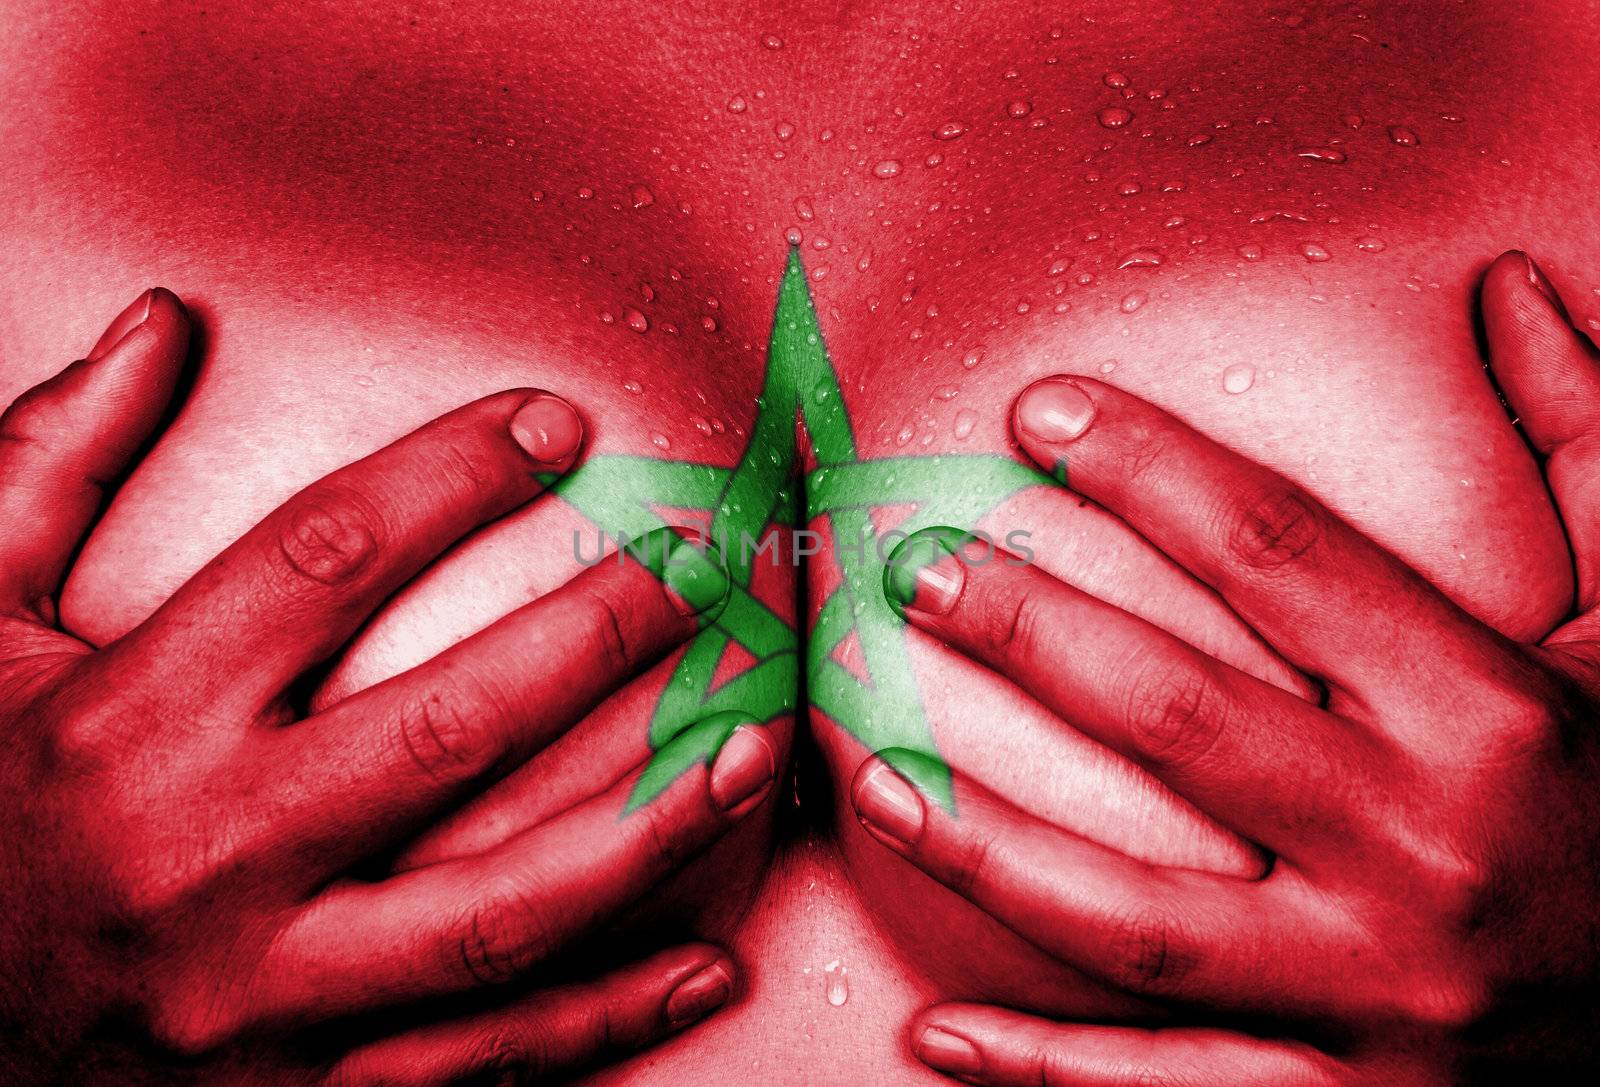 Sweaty upper part of female body, hands covering breasts, flag of Morocco